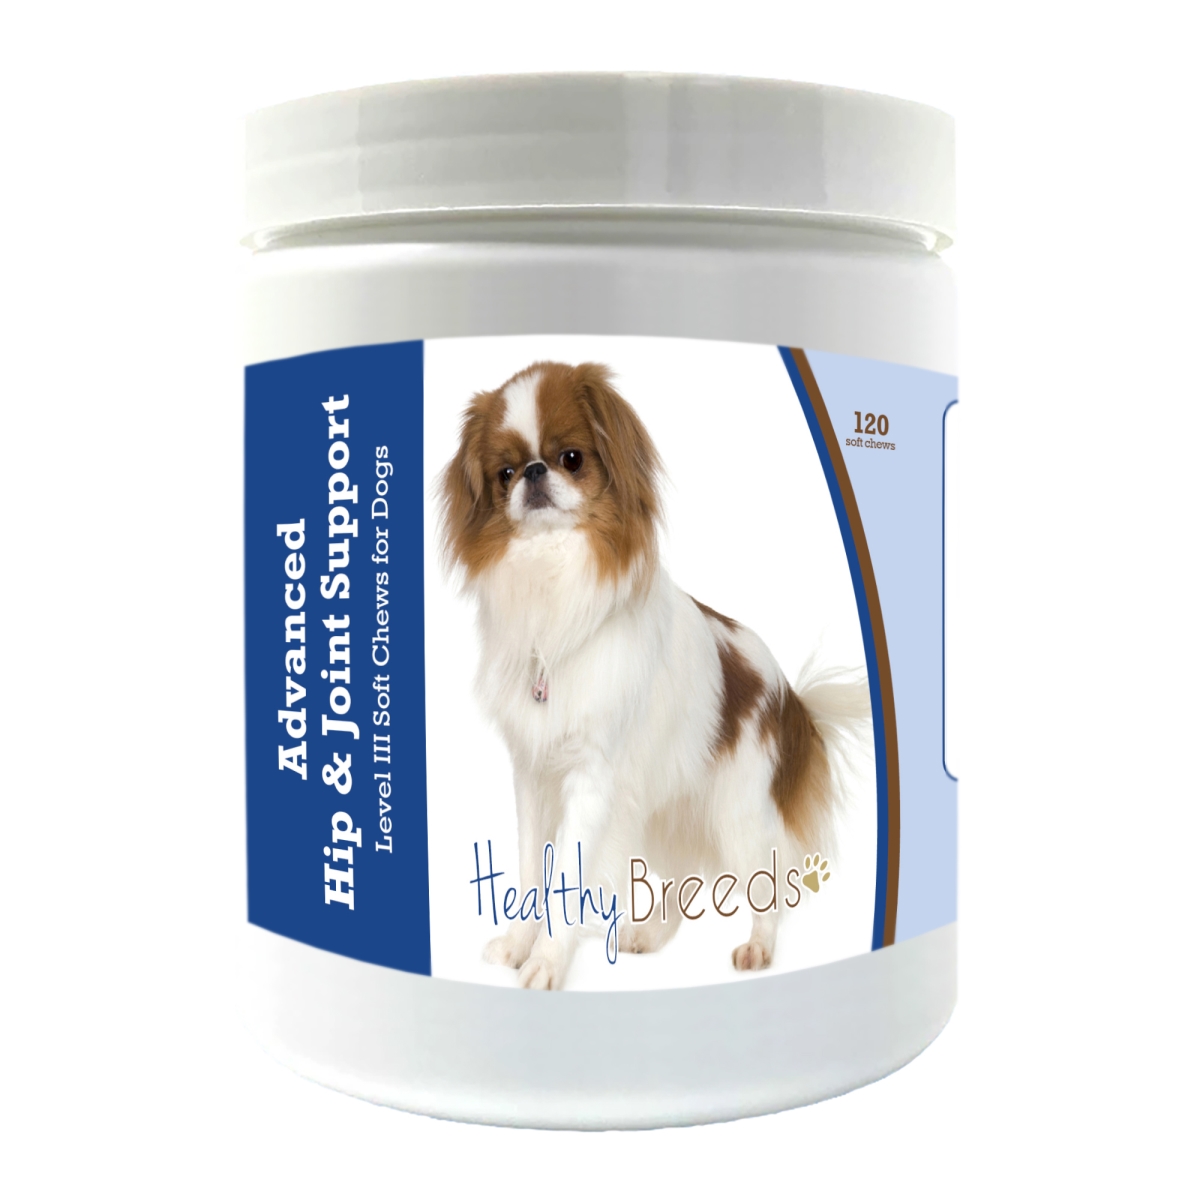 Picture of Healthy Breeds 192959898491 Japanese Chin Advanced Hip & Joint Support Level III Soft Chews for Dogs